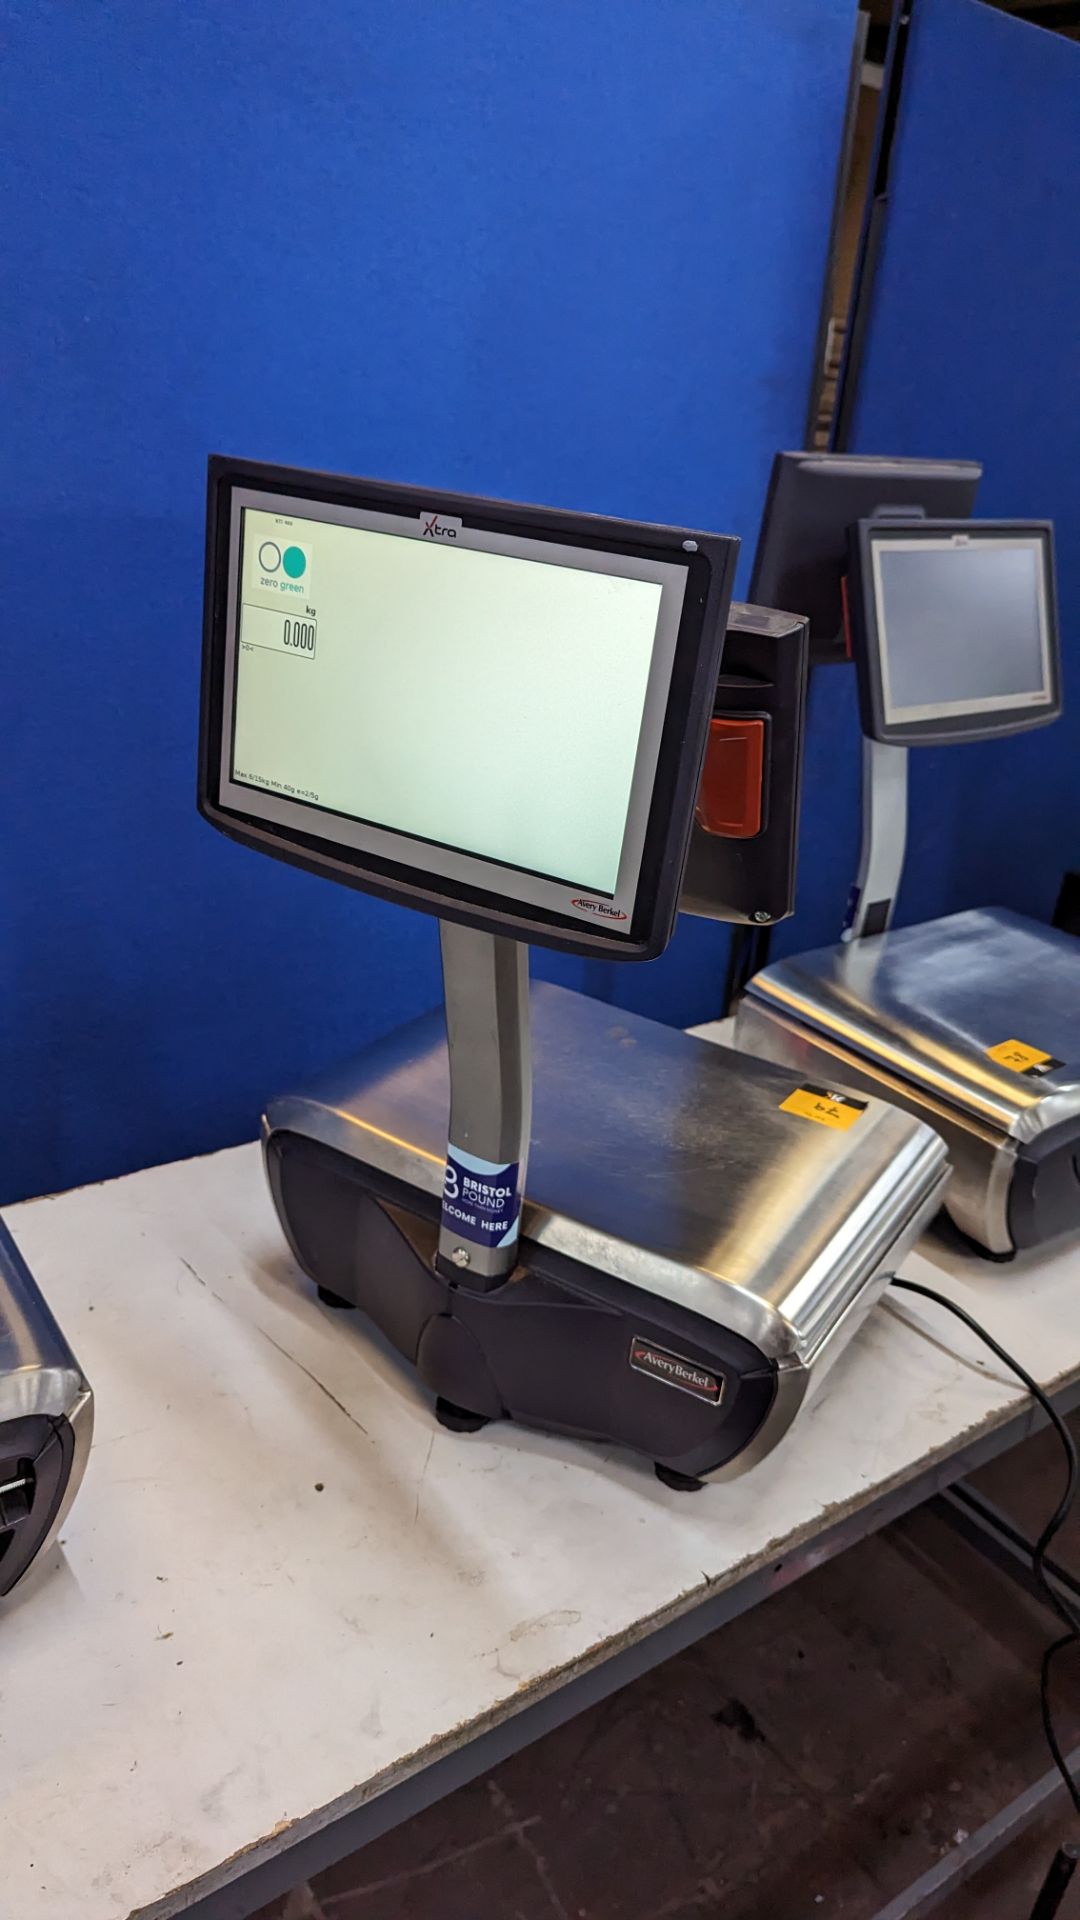 Avery Berkel Xti 400 Label & Receipt printing scale. 6kg/15kg capacity. These scales include a 10" - Image 17 of 17